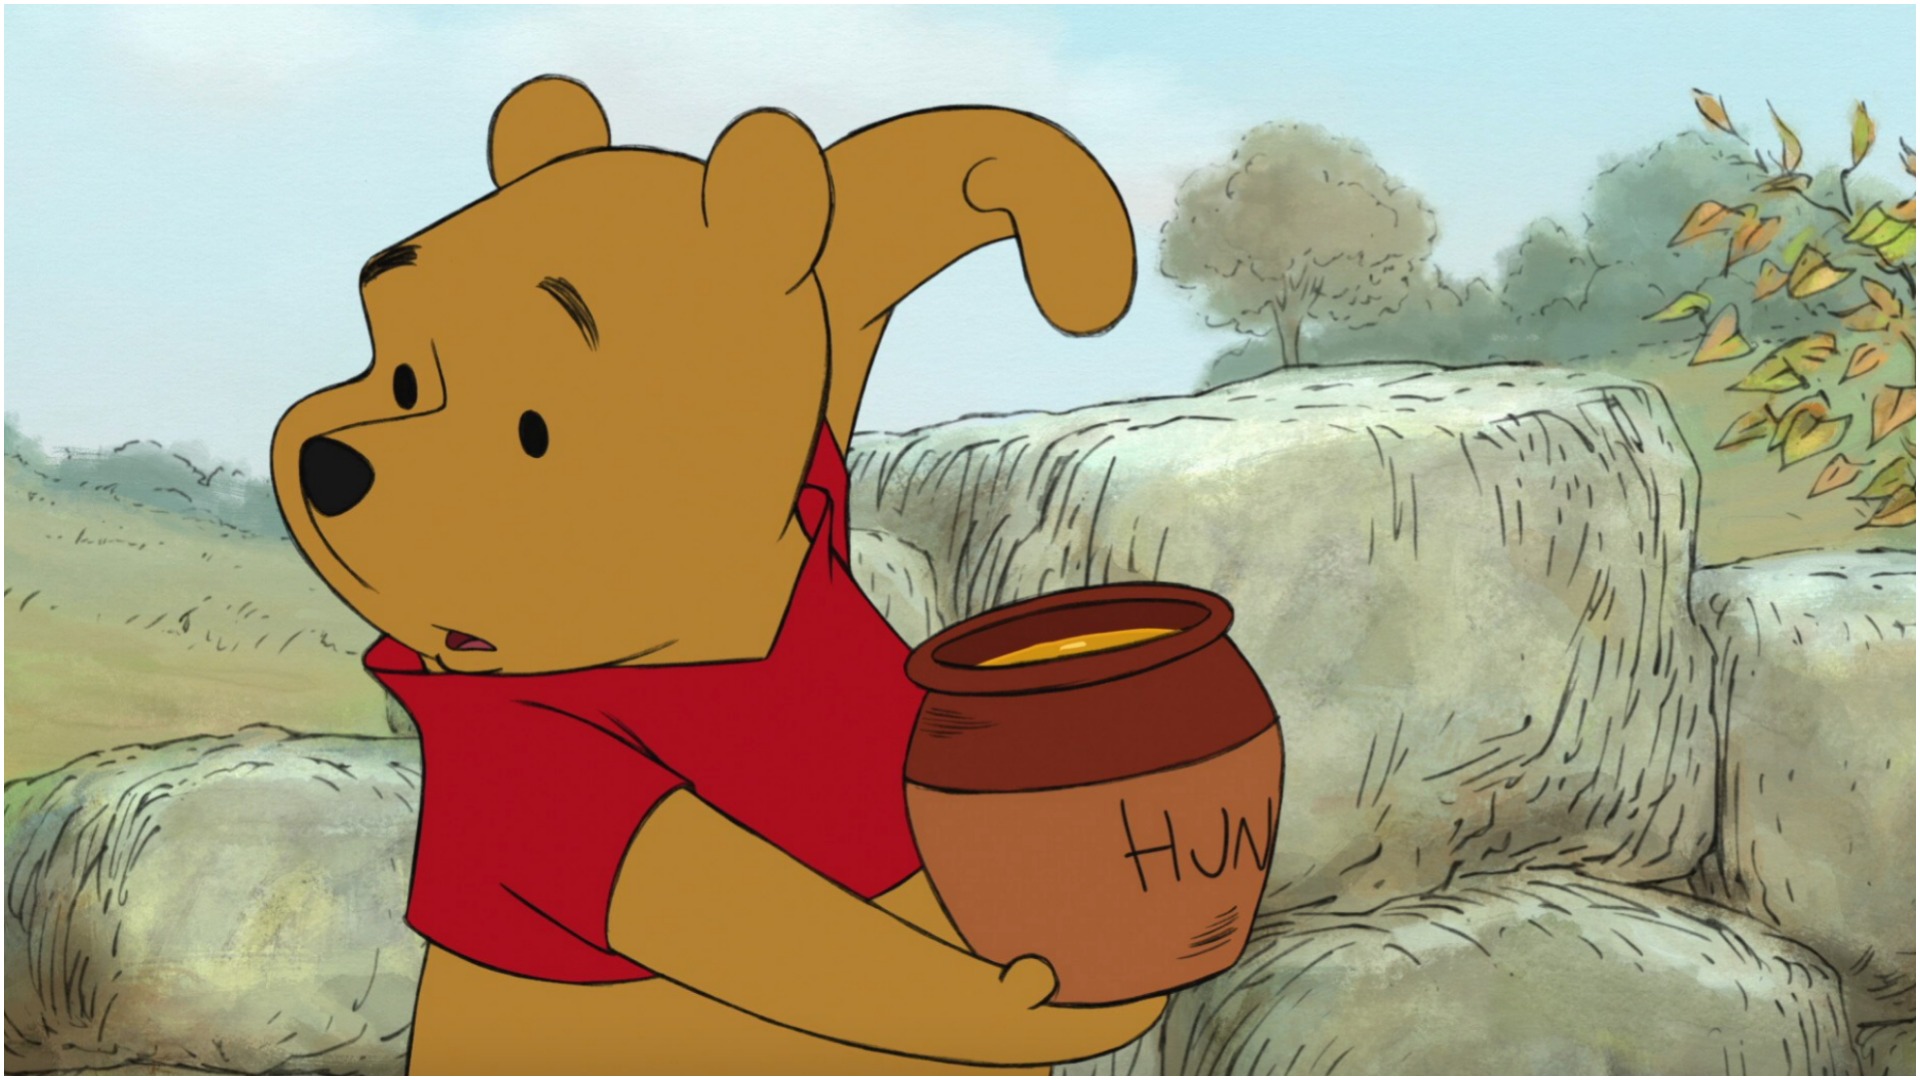 Winnie the Pooh is getting a horror movie – and the first look is here